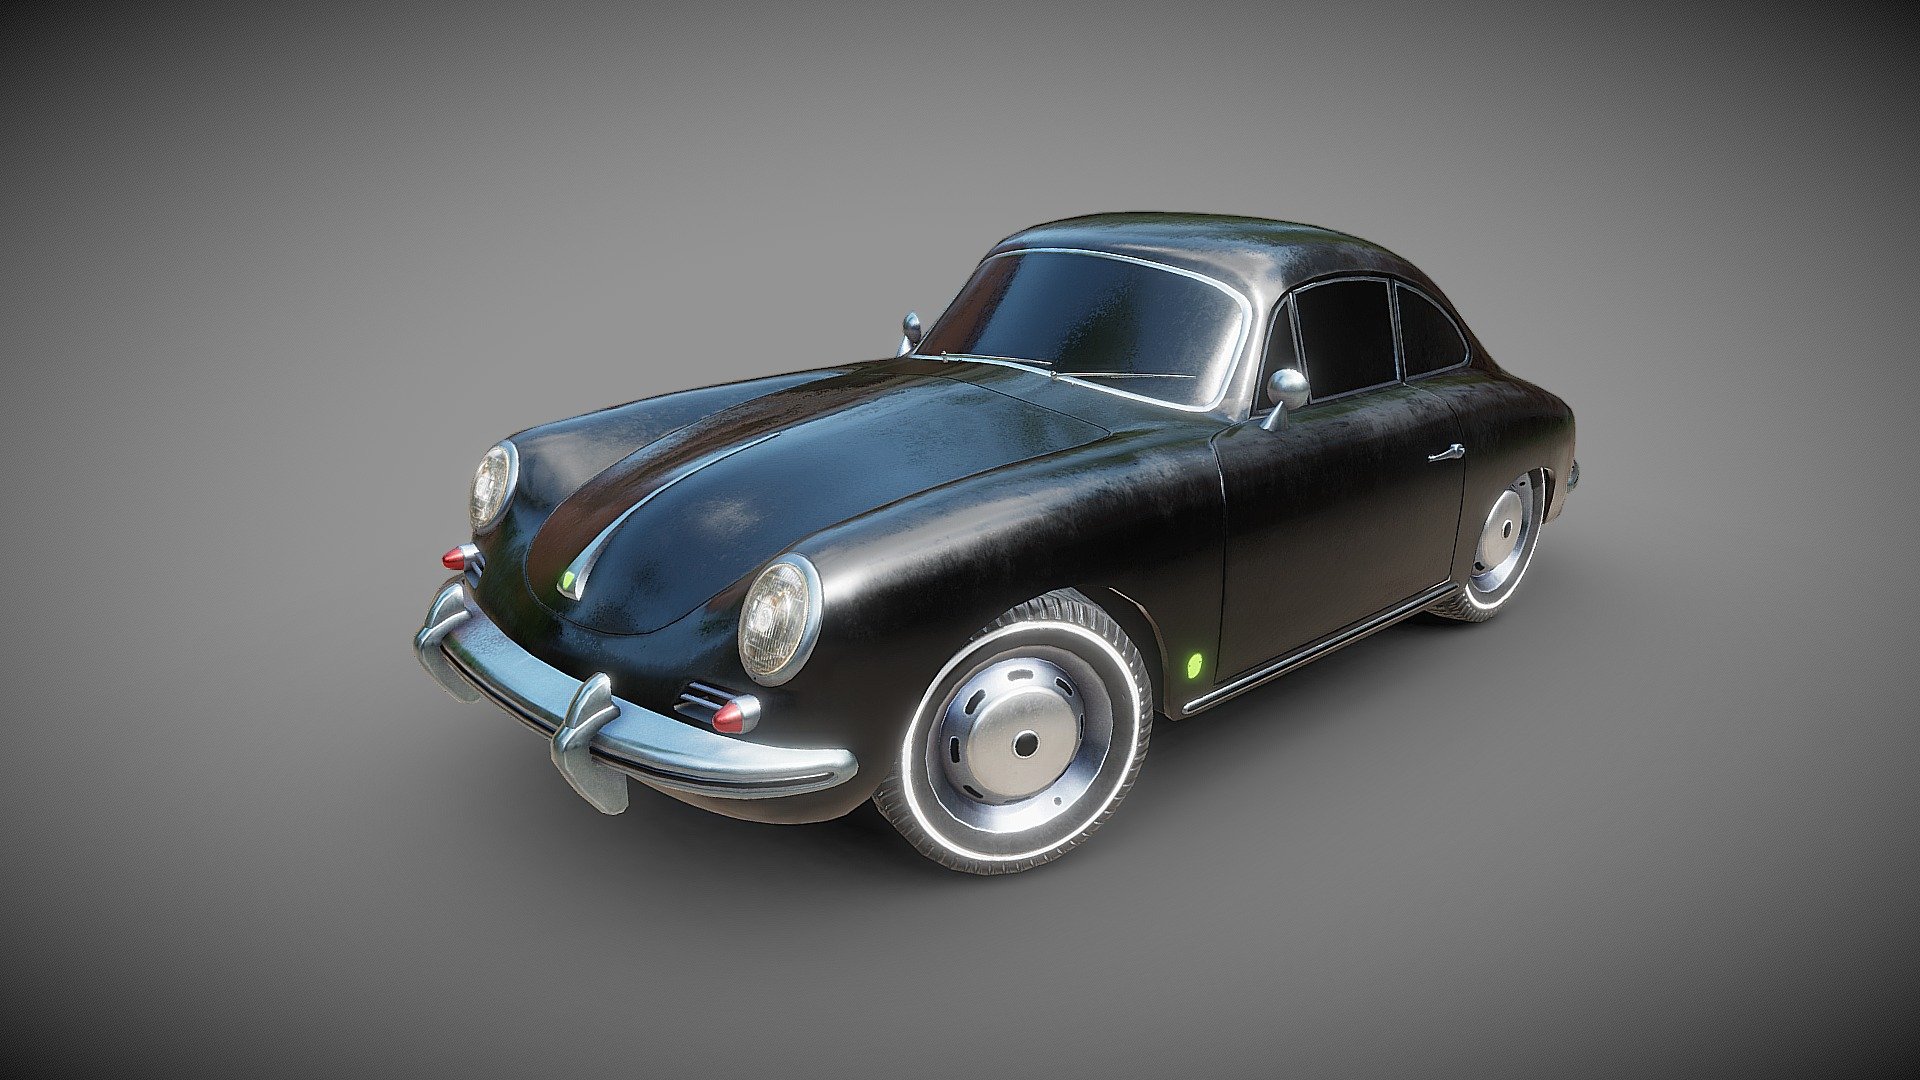 Porsche 365 C coupe, year 1965.
The Porsche 356 shows a long evolution. The 356 was built from 1948 until 1965 in the following model stages: Gmünd models 1948 - 1951, the pre-A models 1950 - 1955, the 356 A 1955 - 1959, the 356 B 1959 - 1963, the 356 C 1963 - 1965. Between the years 1955 and 1965 Porsche also built a special 356 model; the Porsche 356 Carrera with four overhead camshafts. Between the years 1954 and 1964 Porsche built special convertible models like the America Roadster (16 built), the Speedster (4847 built) and the Convertible D 3d model